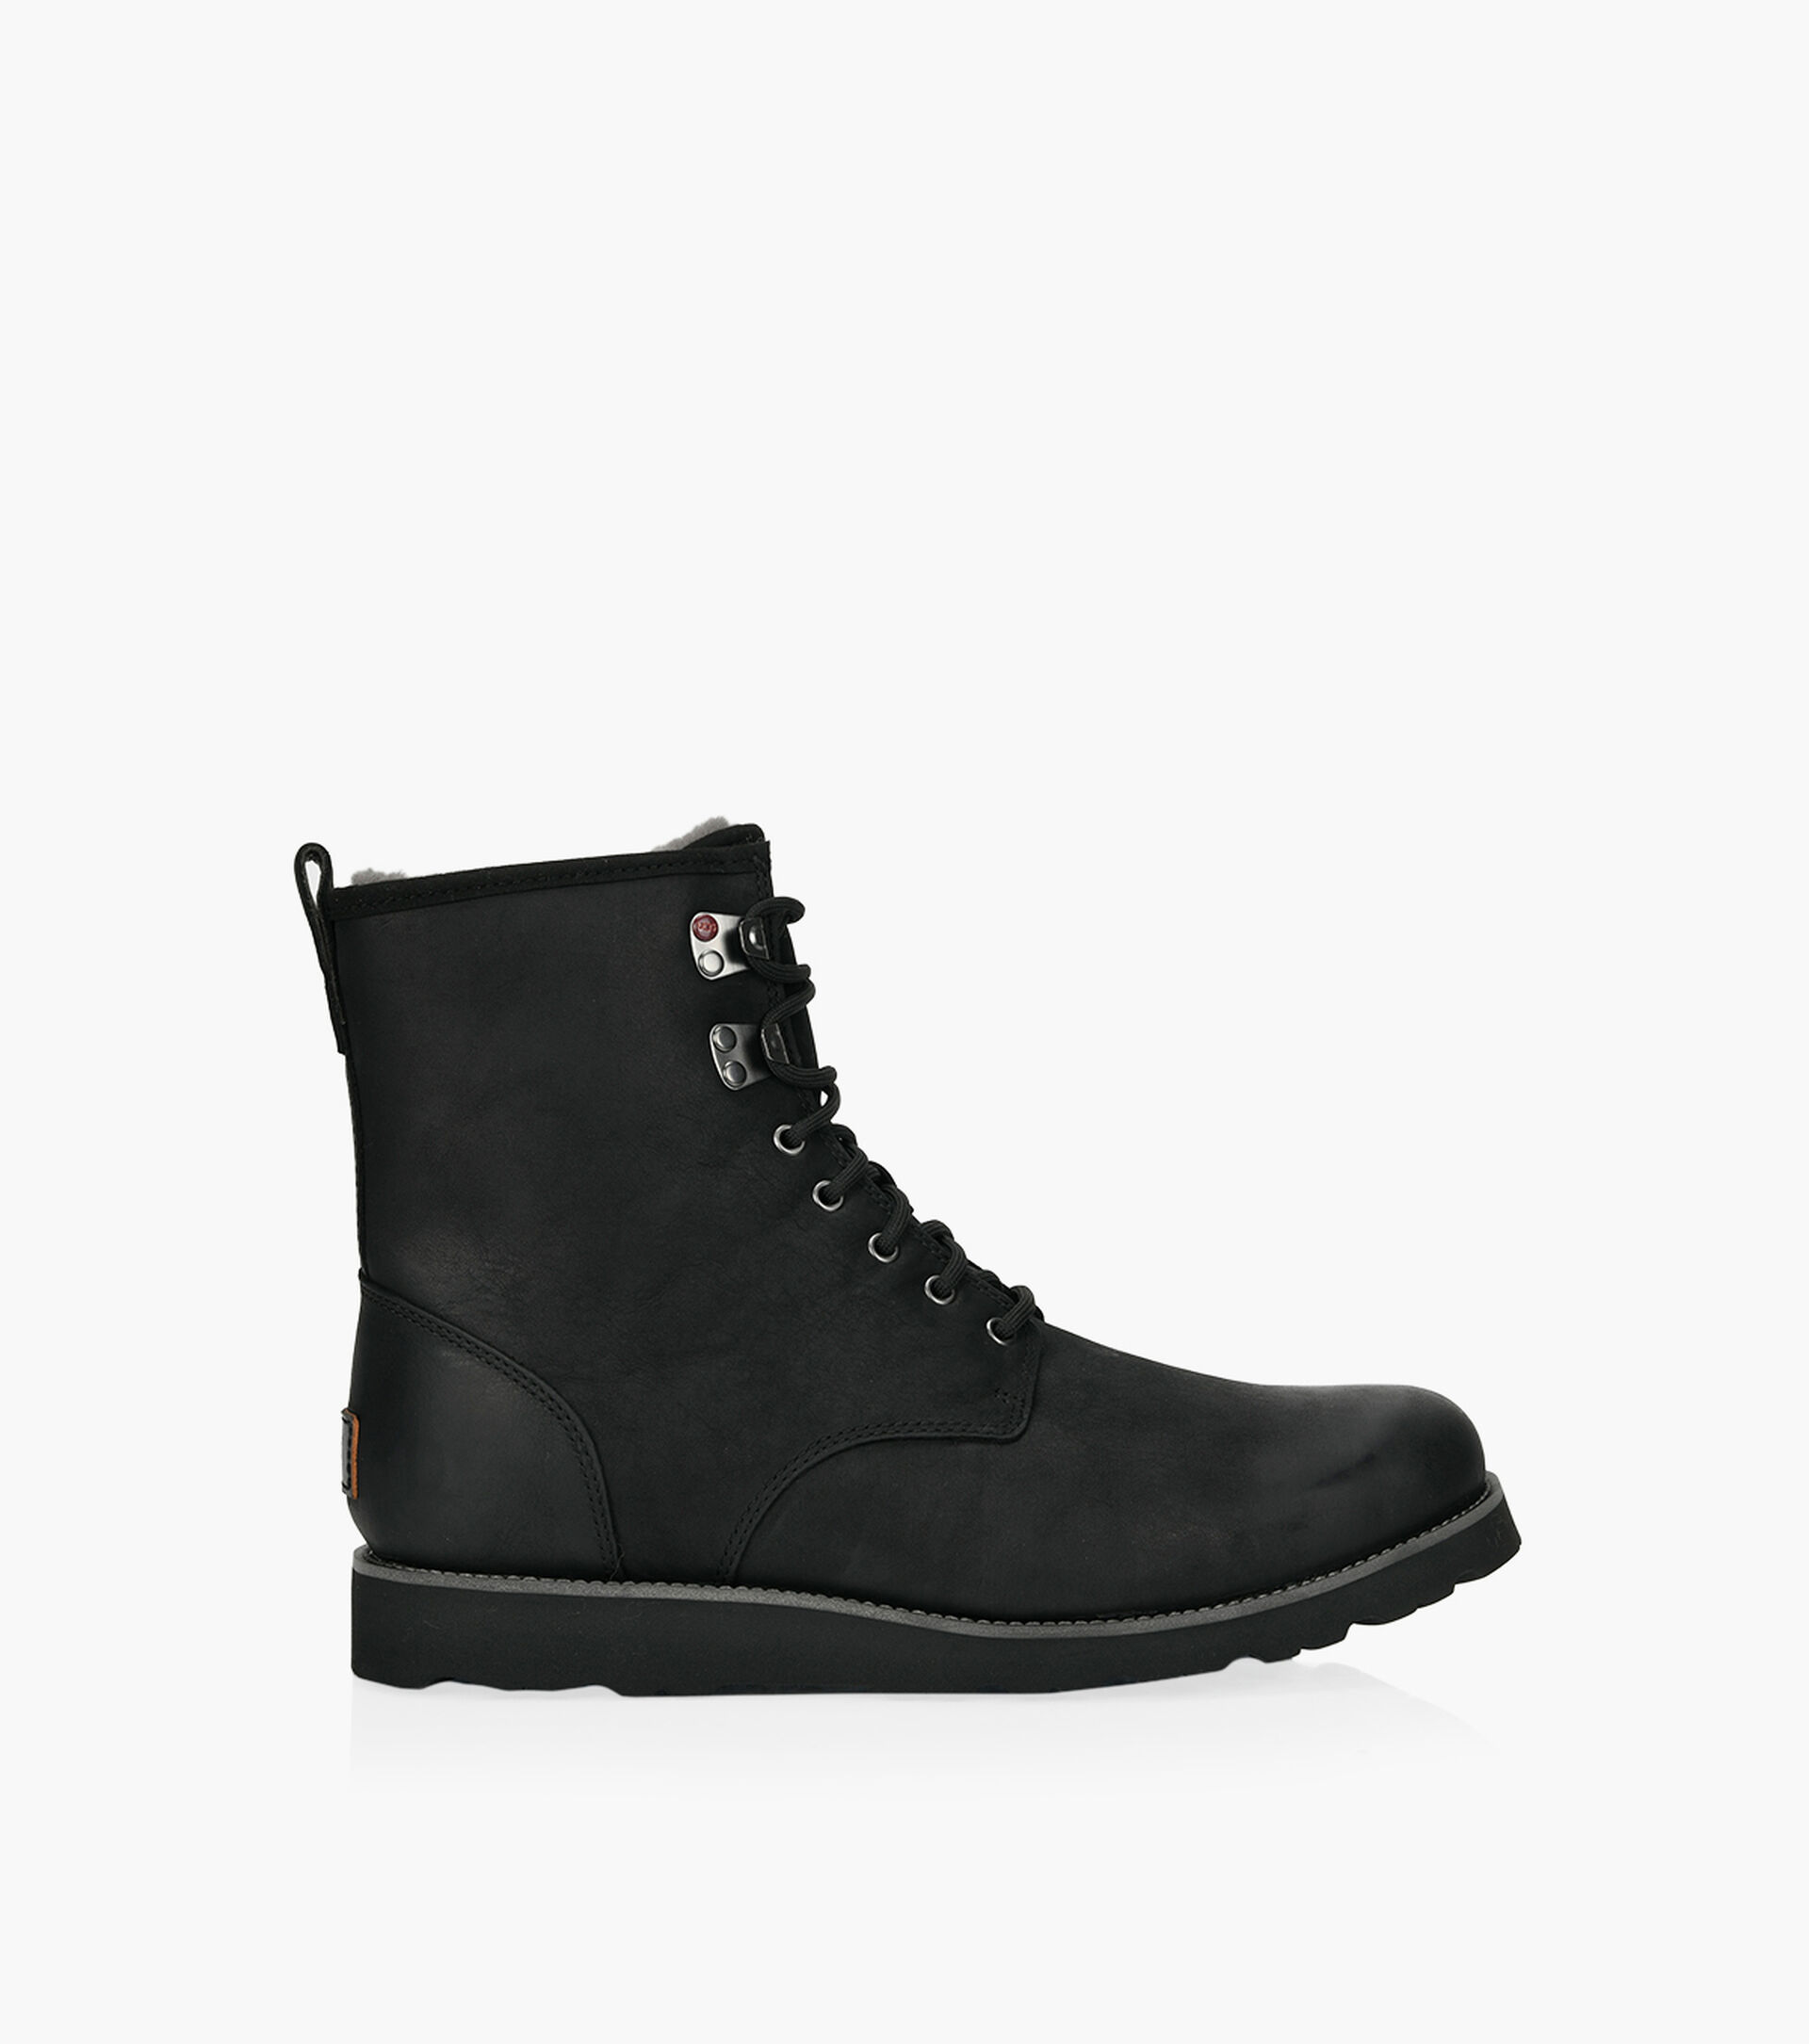 Ugg Hannen Black Discount Shopping, 53% OFF | theipadguide.com